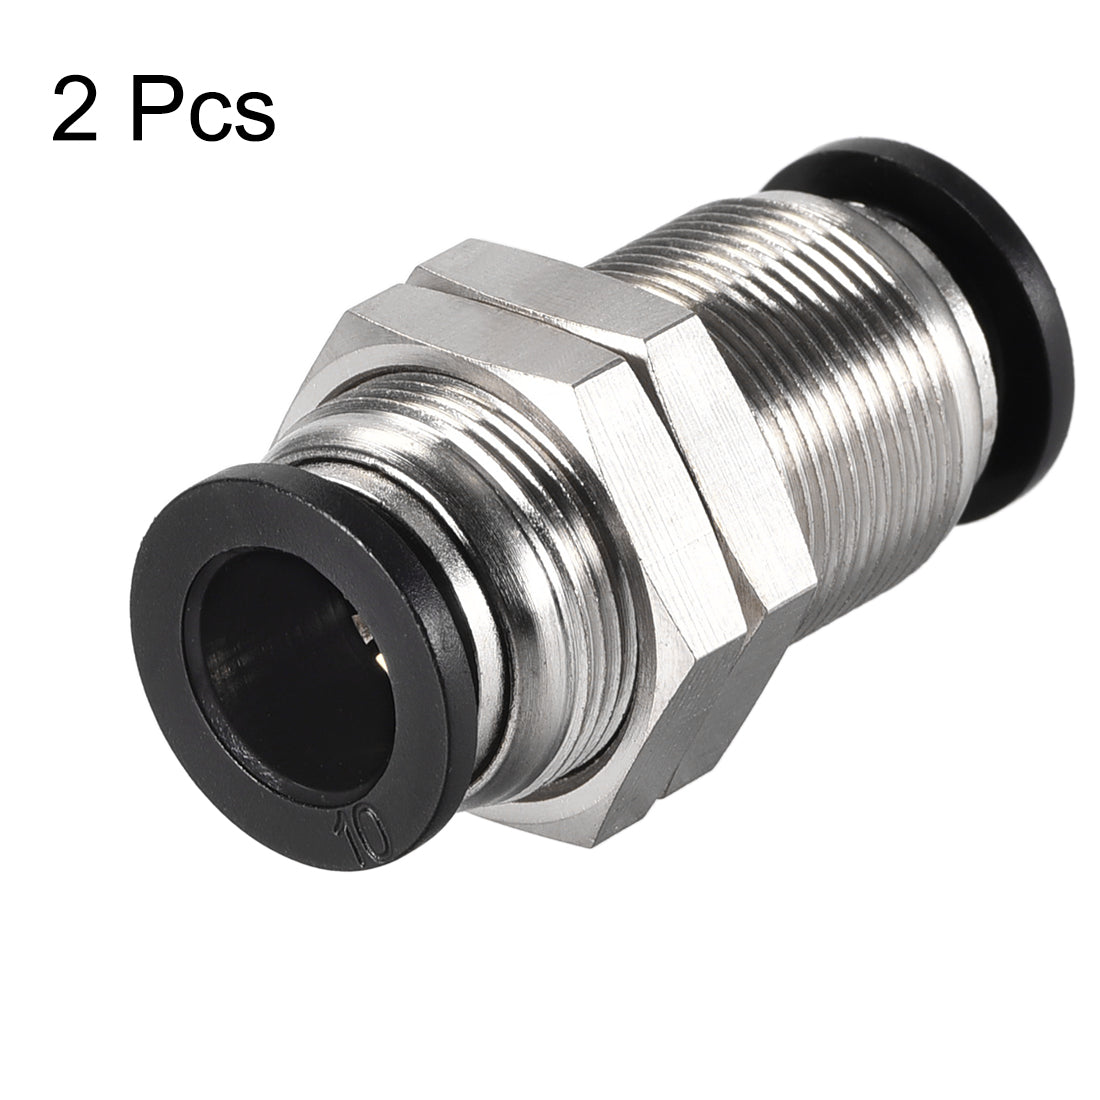 uxcell Uxcell Straight Pneumatic Push to Quick Connect Fittings Bulkhead Union 10mm Tube OD X 10mm Tube OD 2pcs